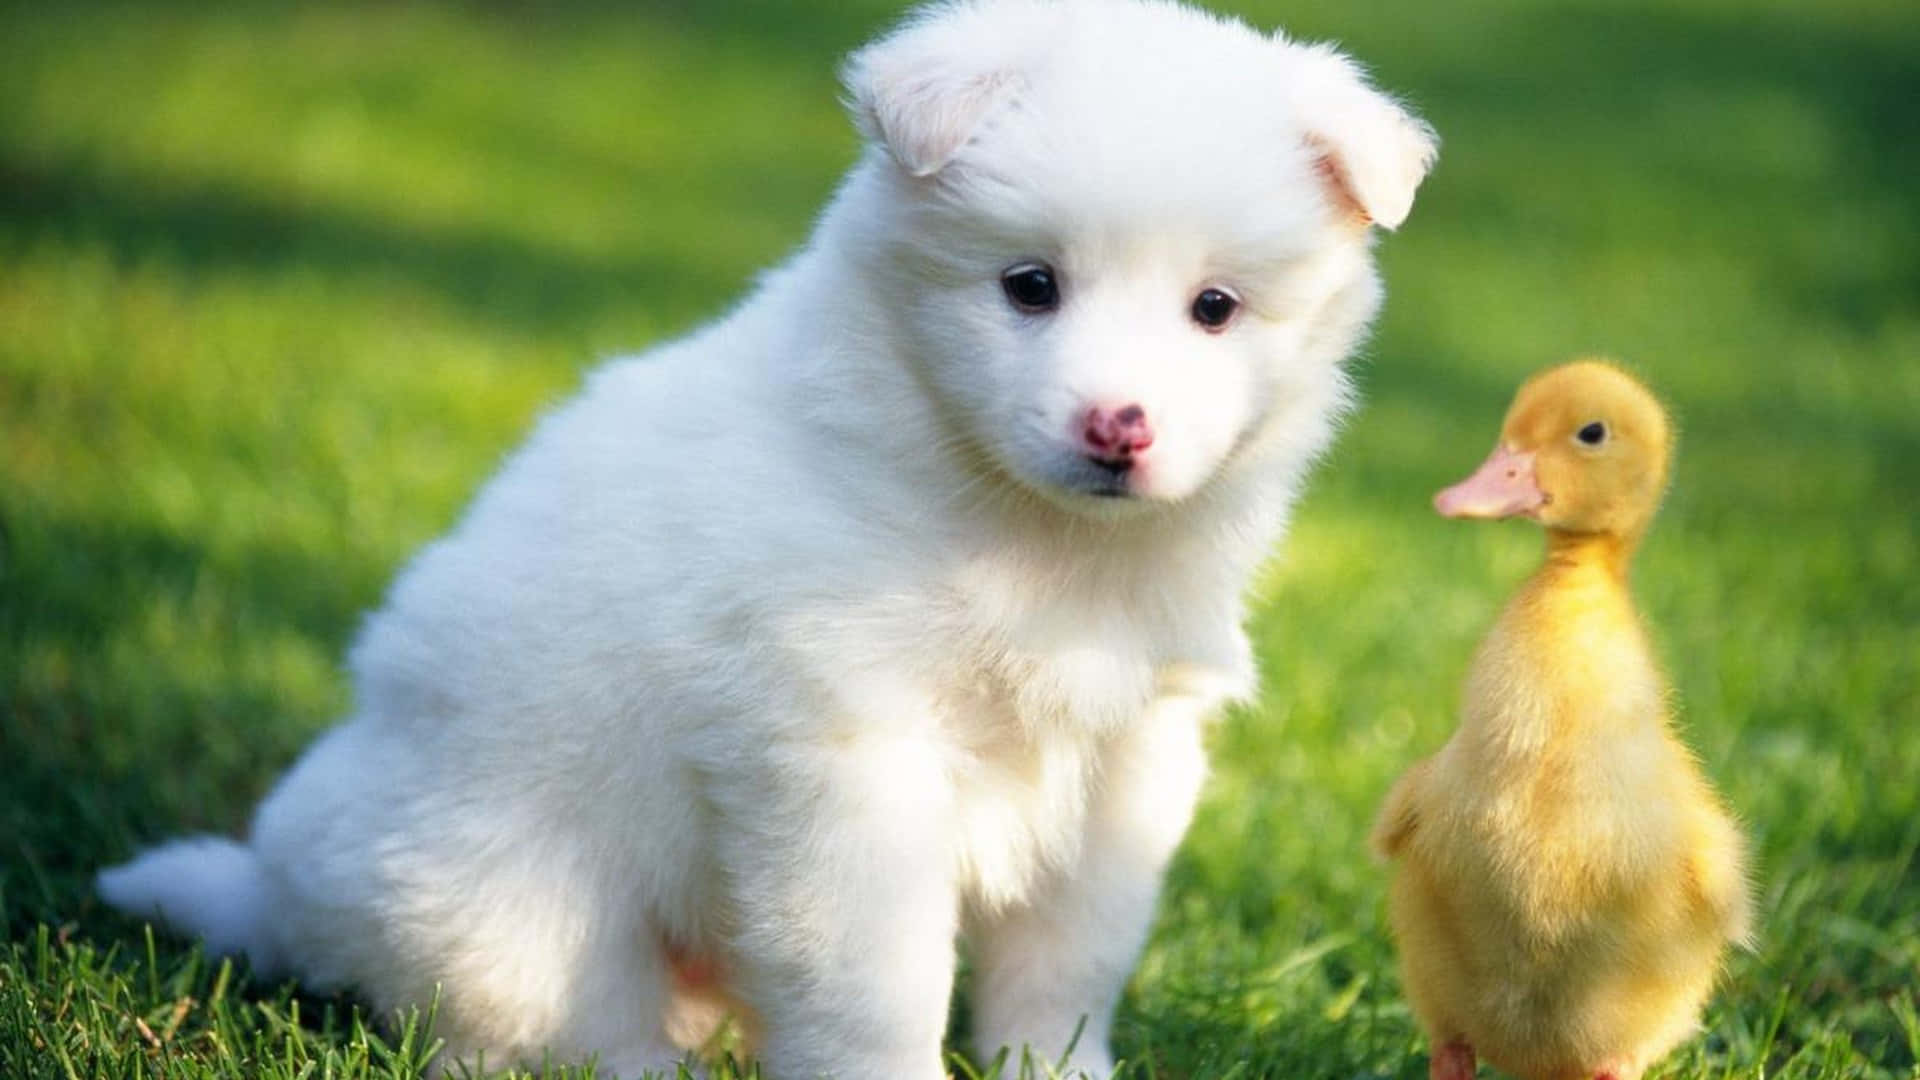 "This Adorable Fluffy Puppy is Ready to Melt Your Heart" Wallpaper